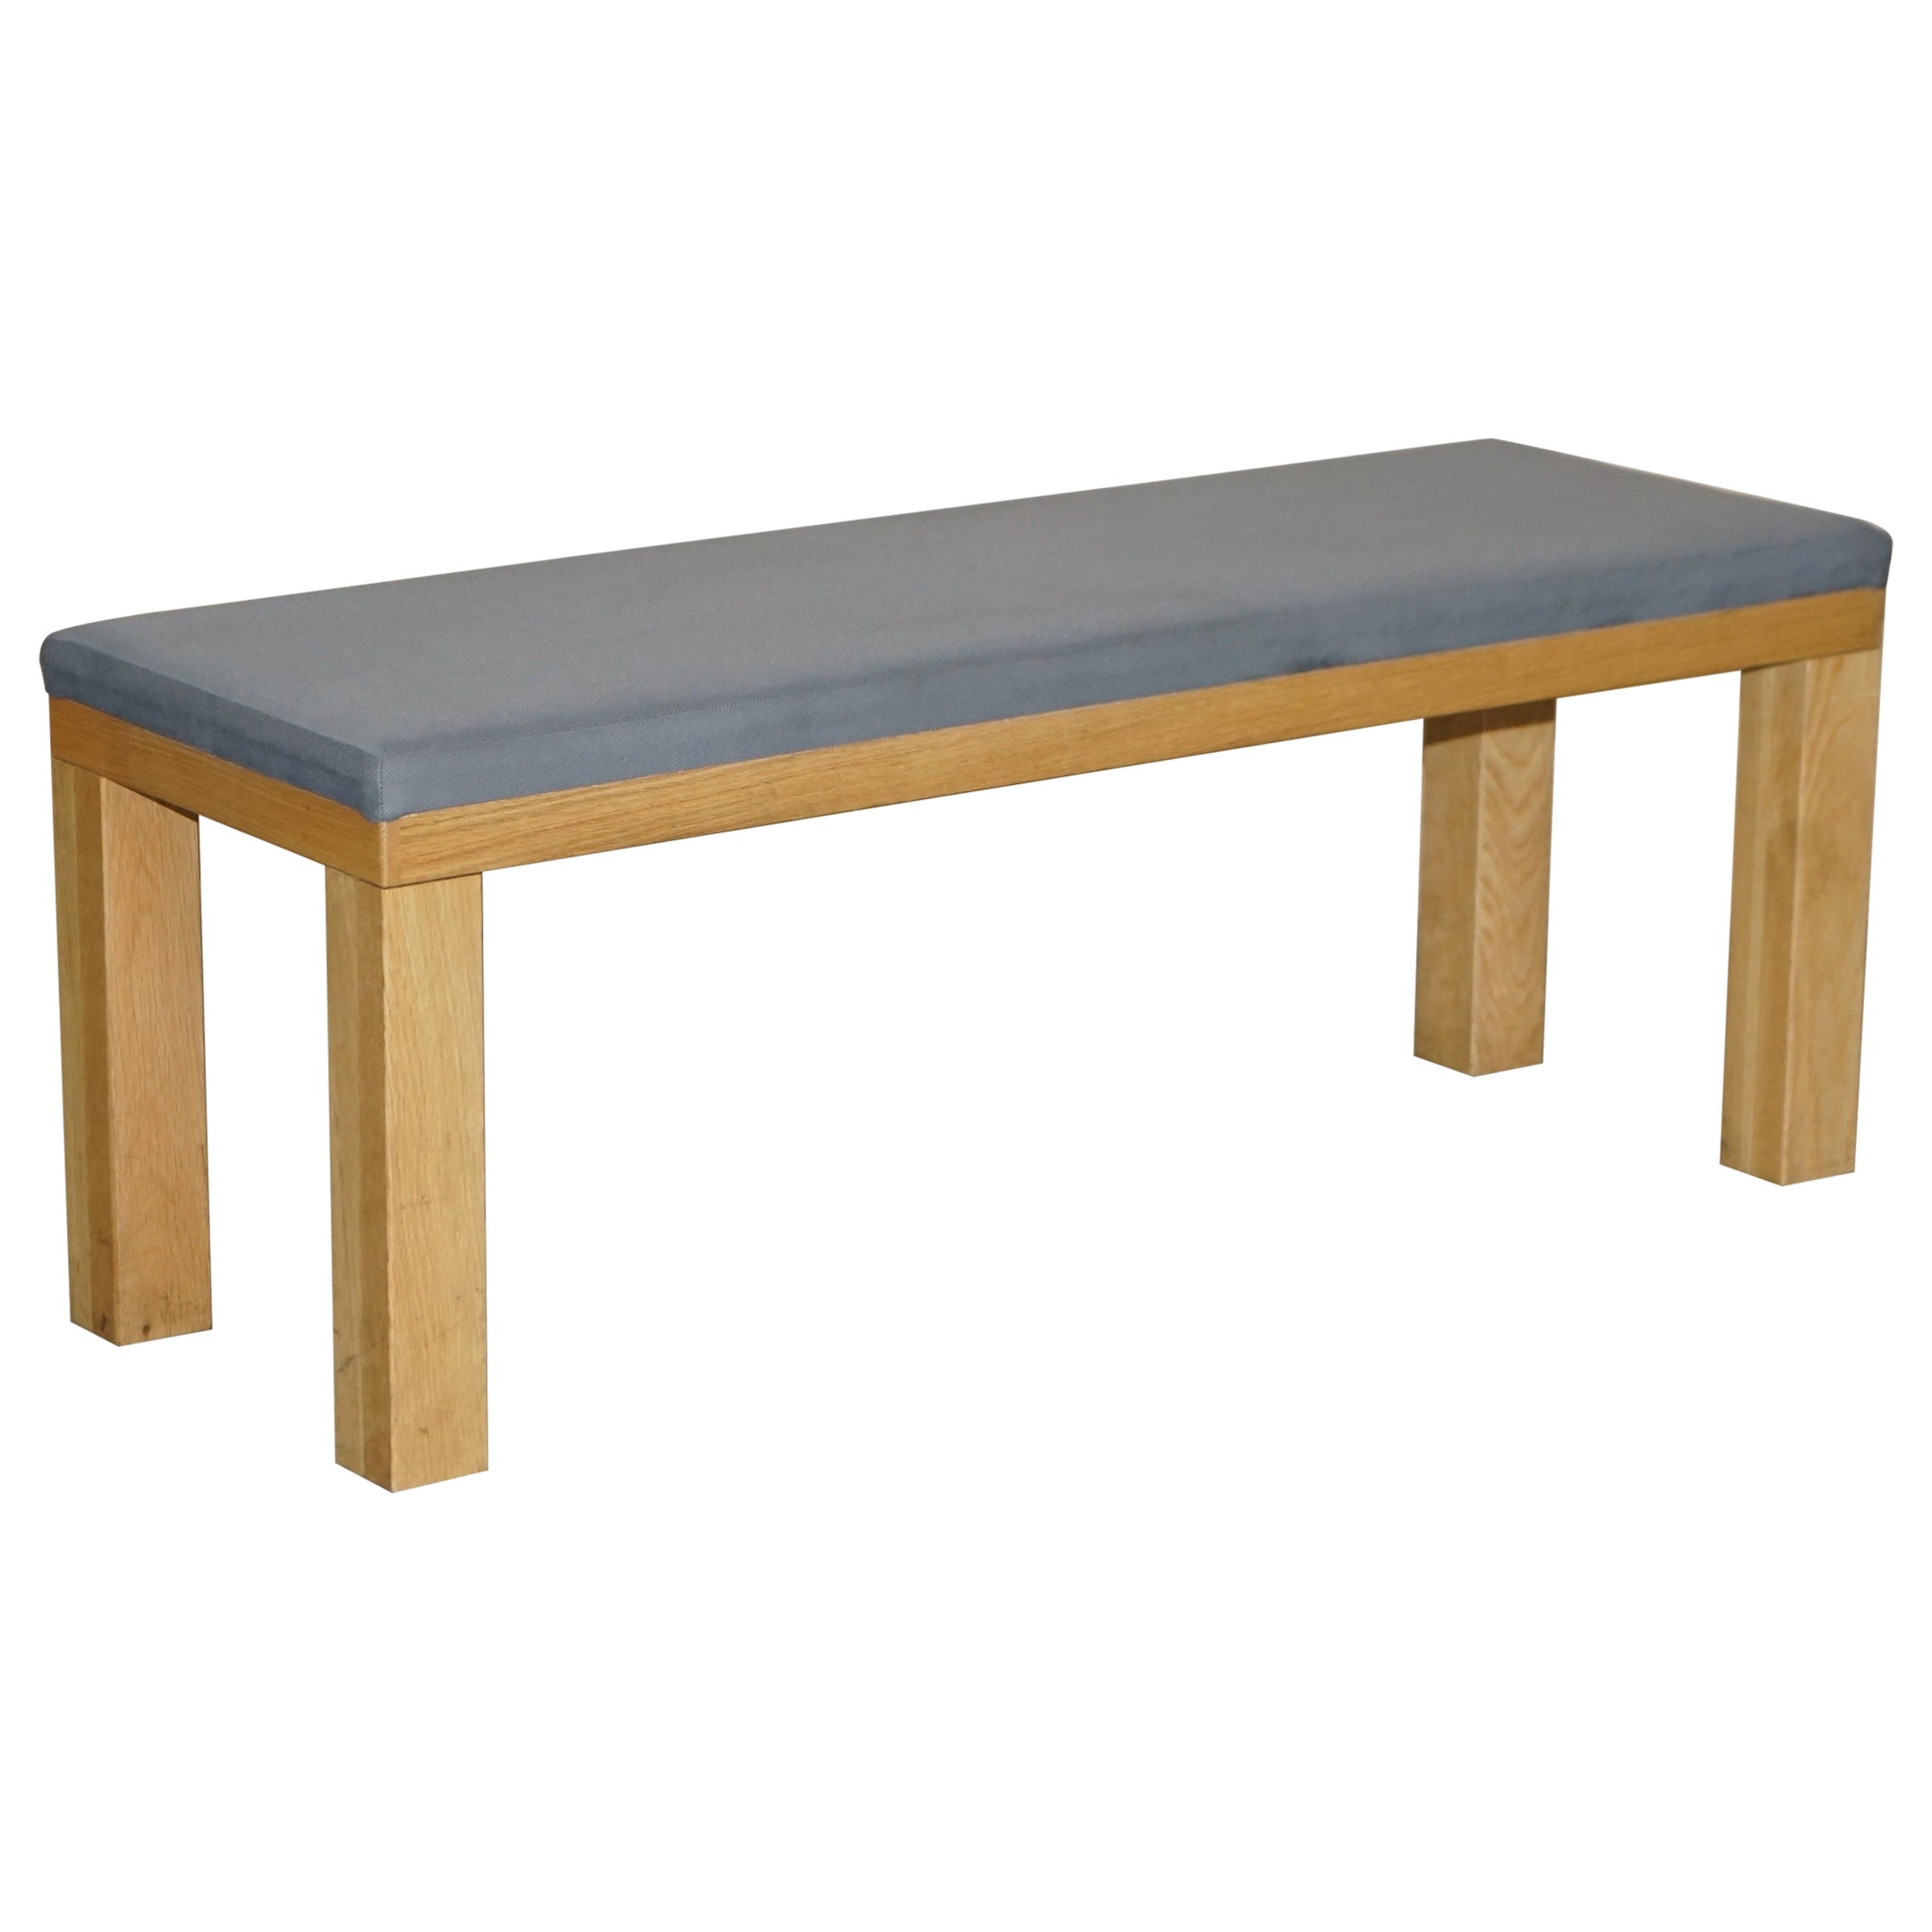 James Burleigh Kitchen Dining Table Bench Sizes Colours & Available